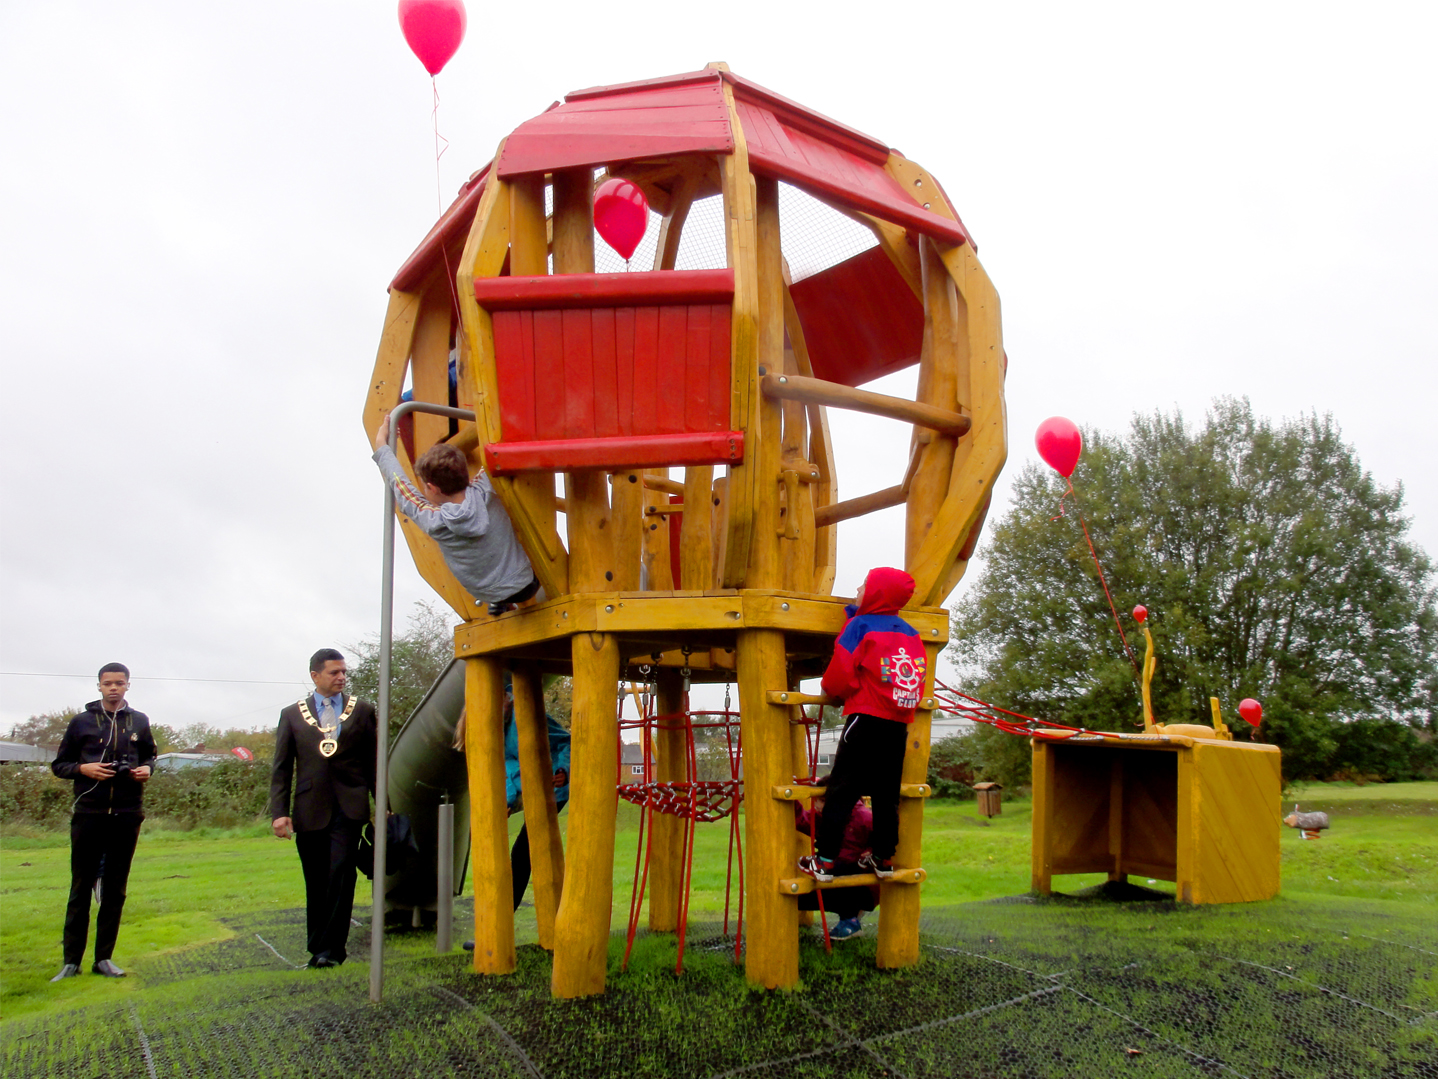 New Haw, Runnymede The Children's Playground Company